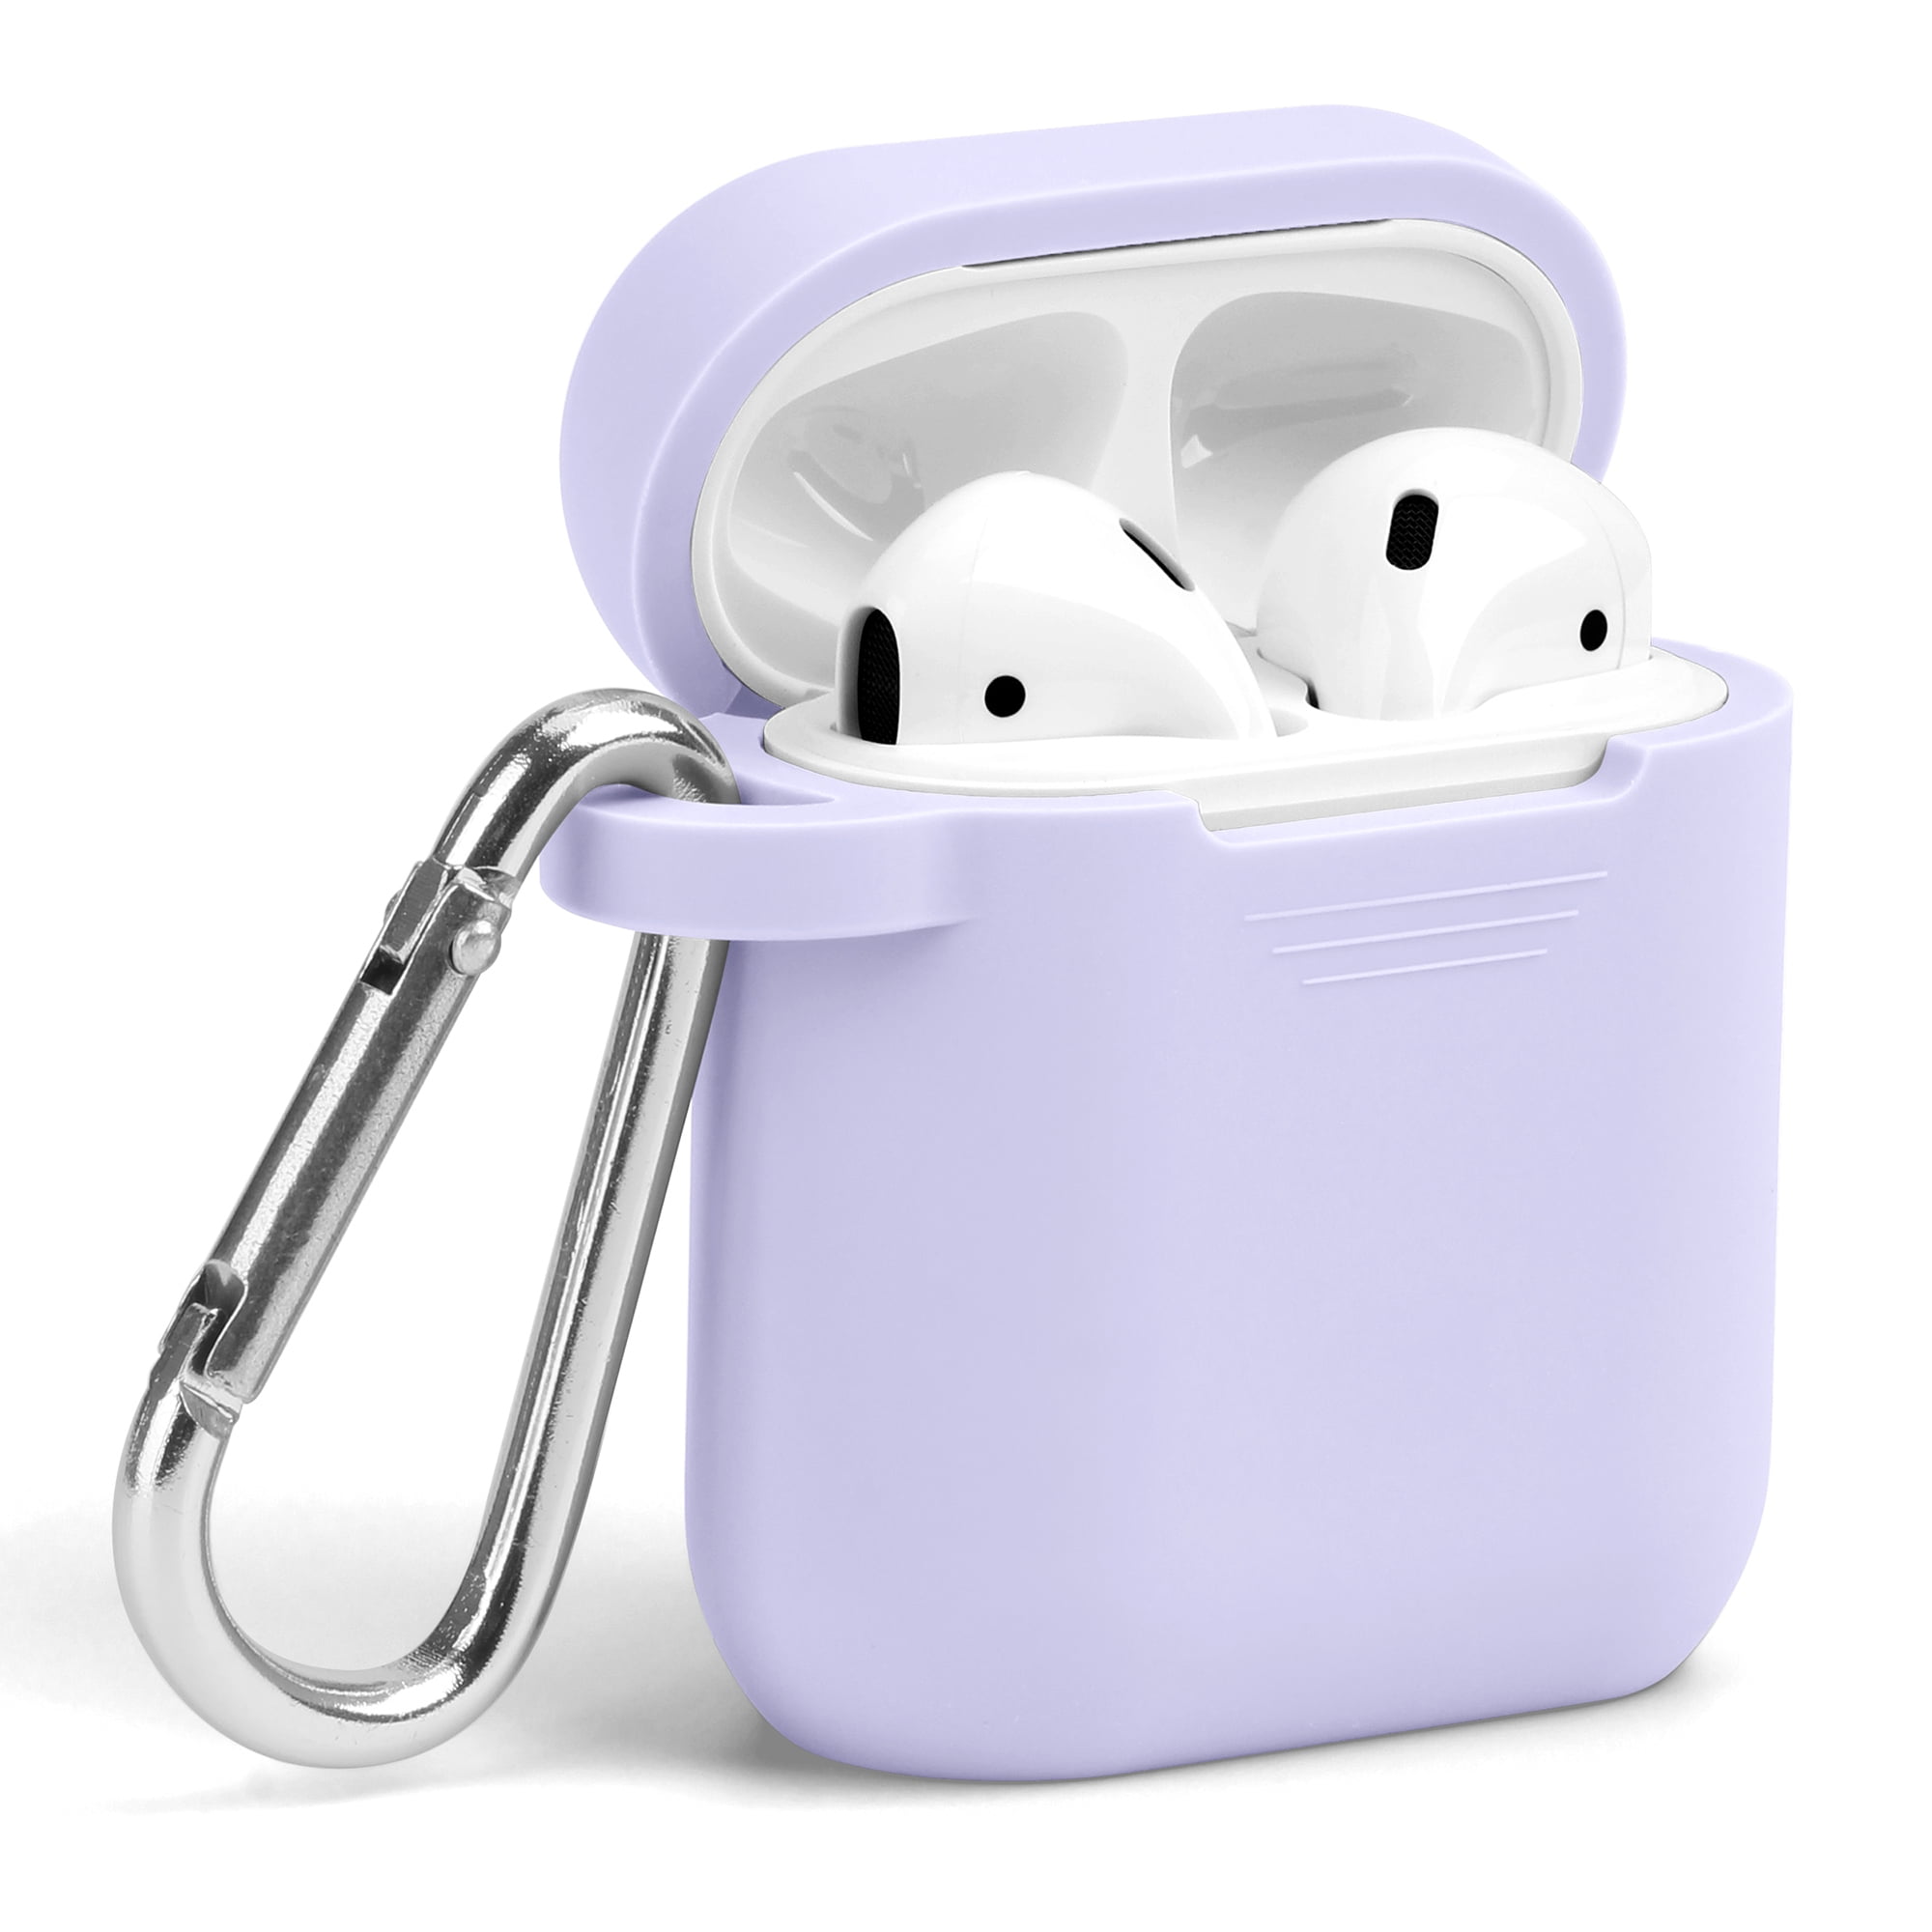 18 Best Apple AirPods Accessories and Cases 2020